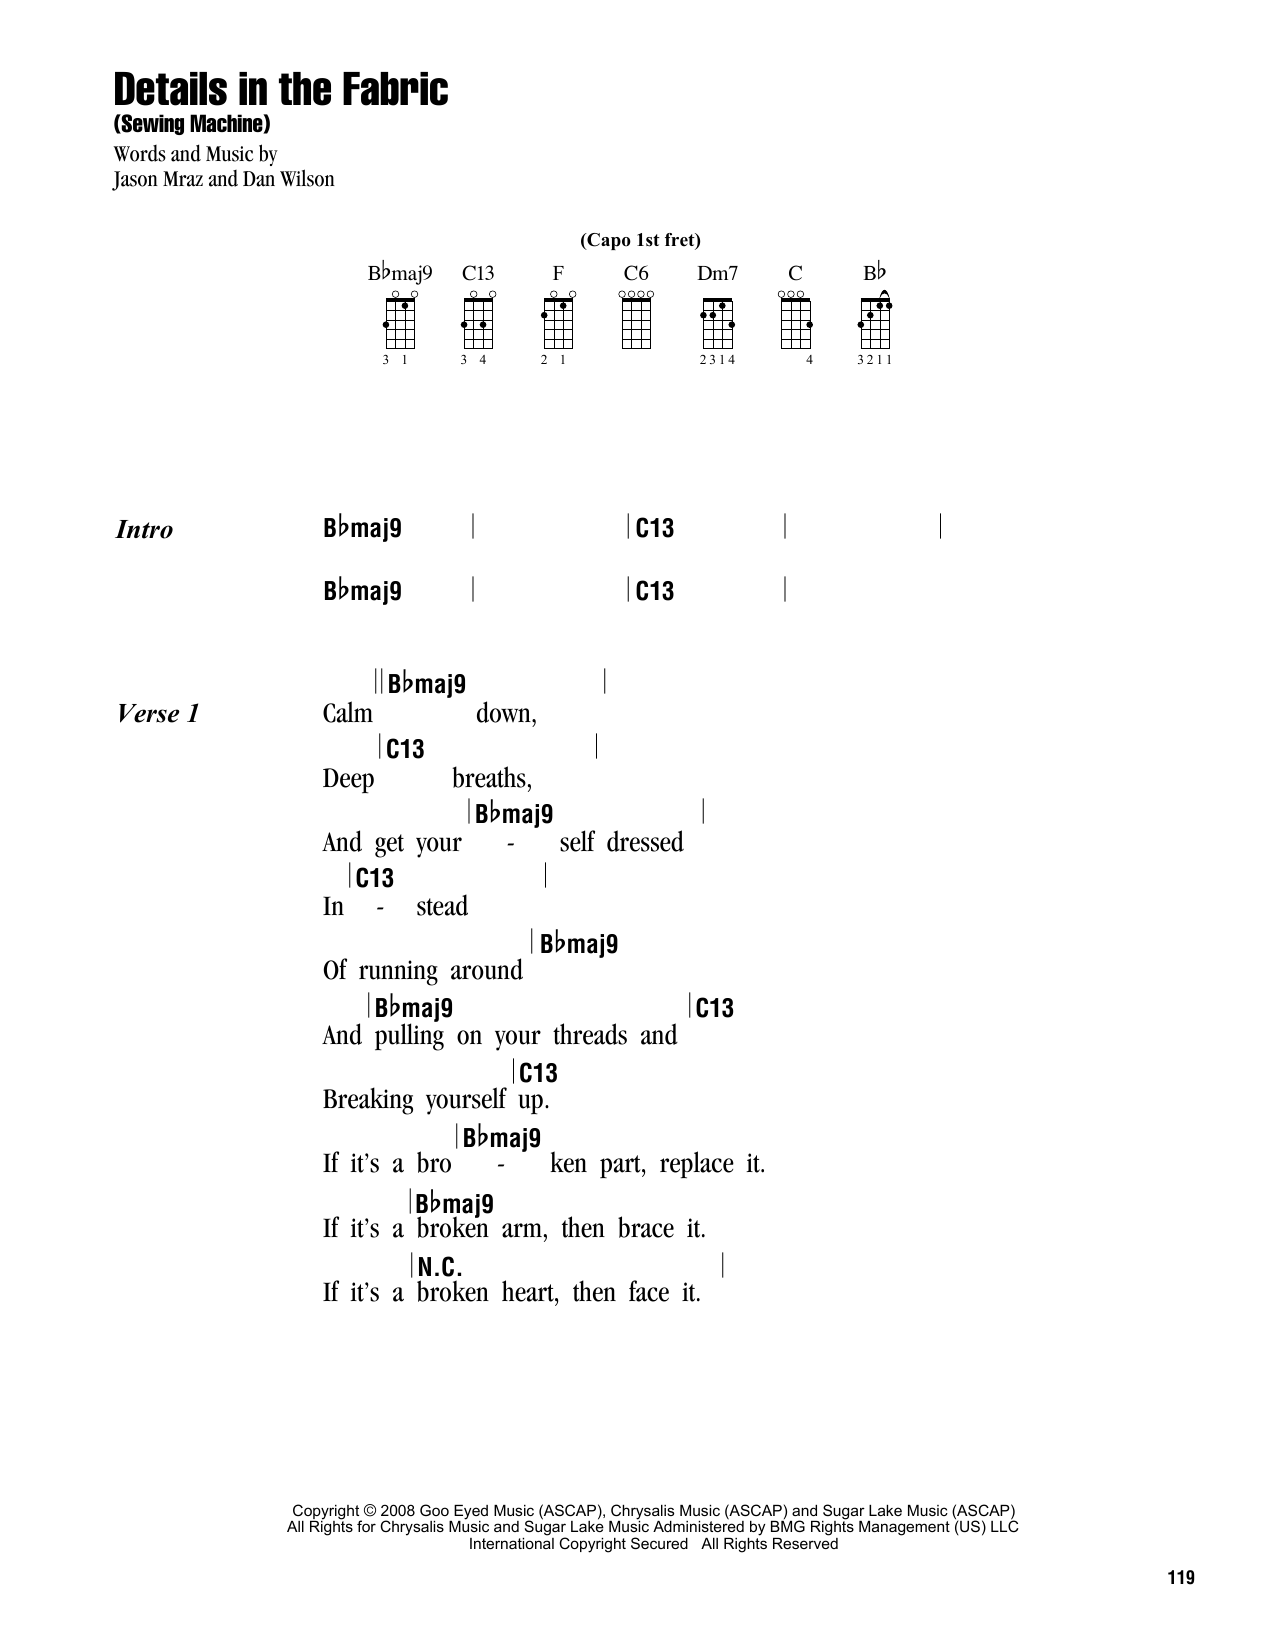 Download Jason Mraz Details In The Fabric (Sewing Machine) Sheet Music